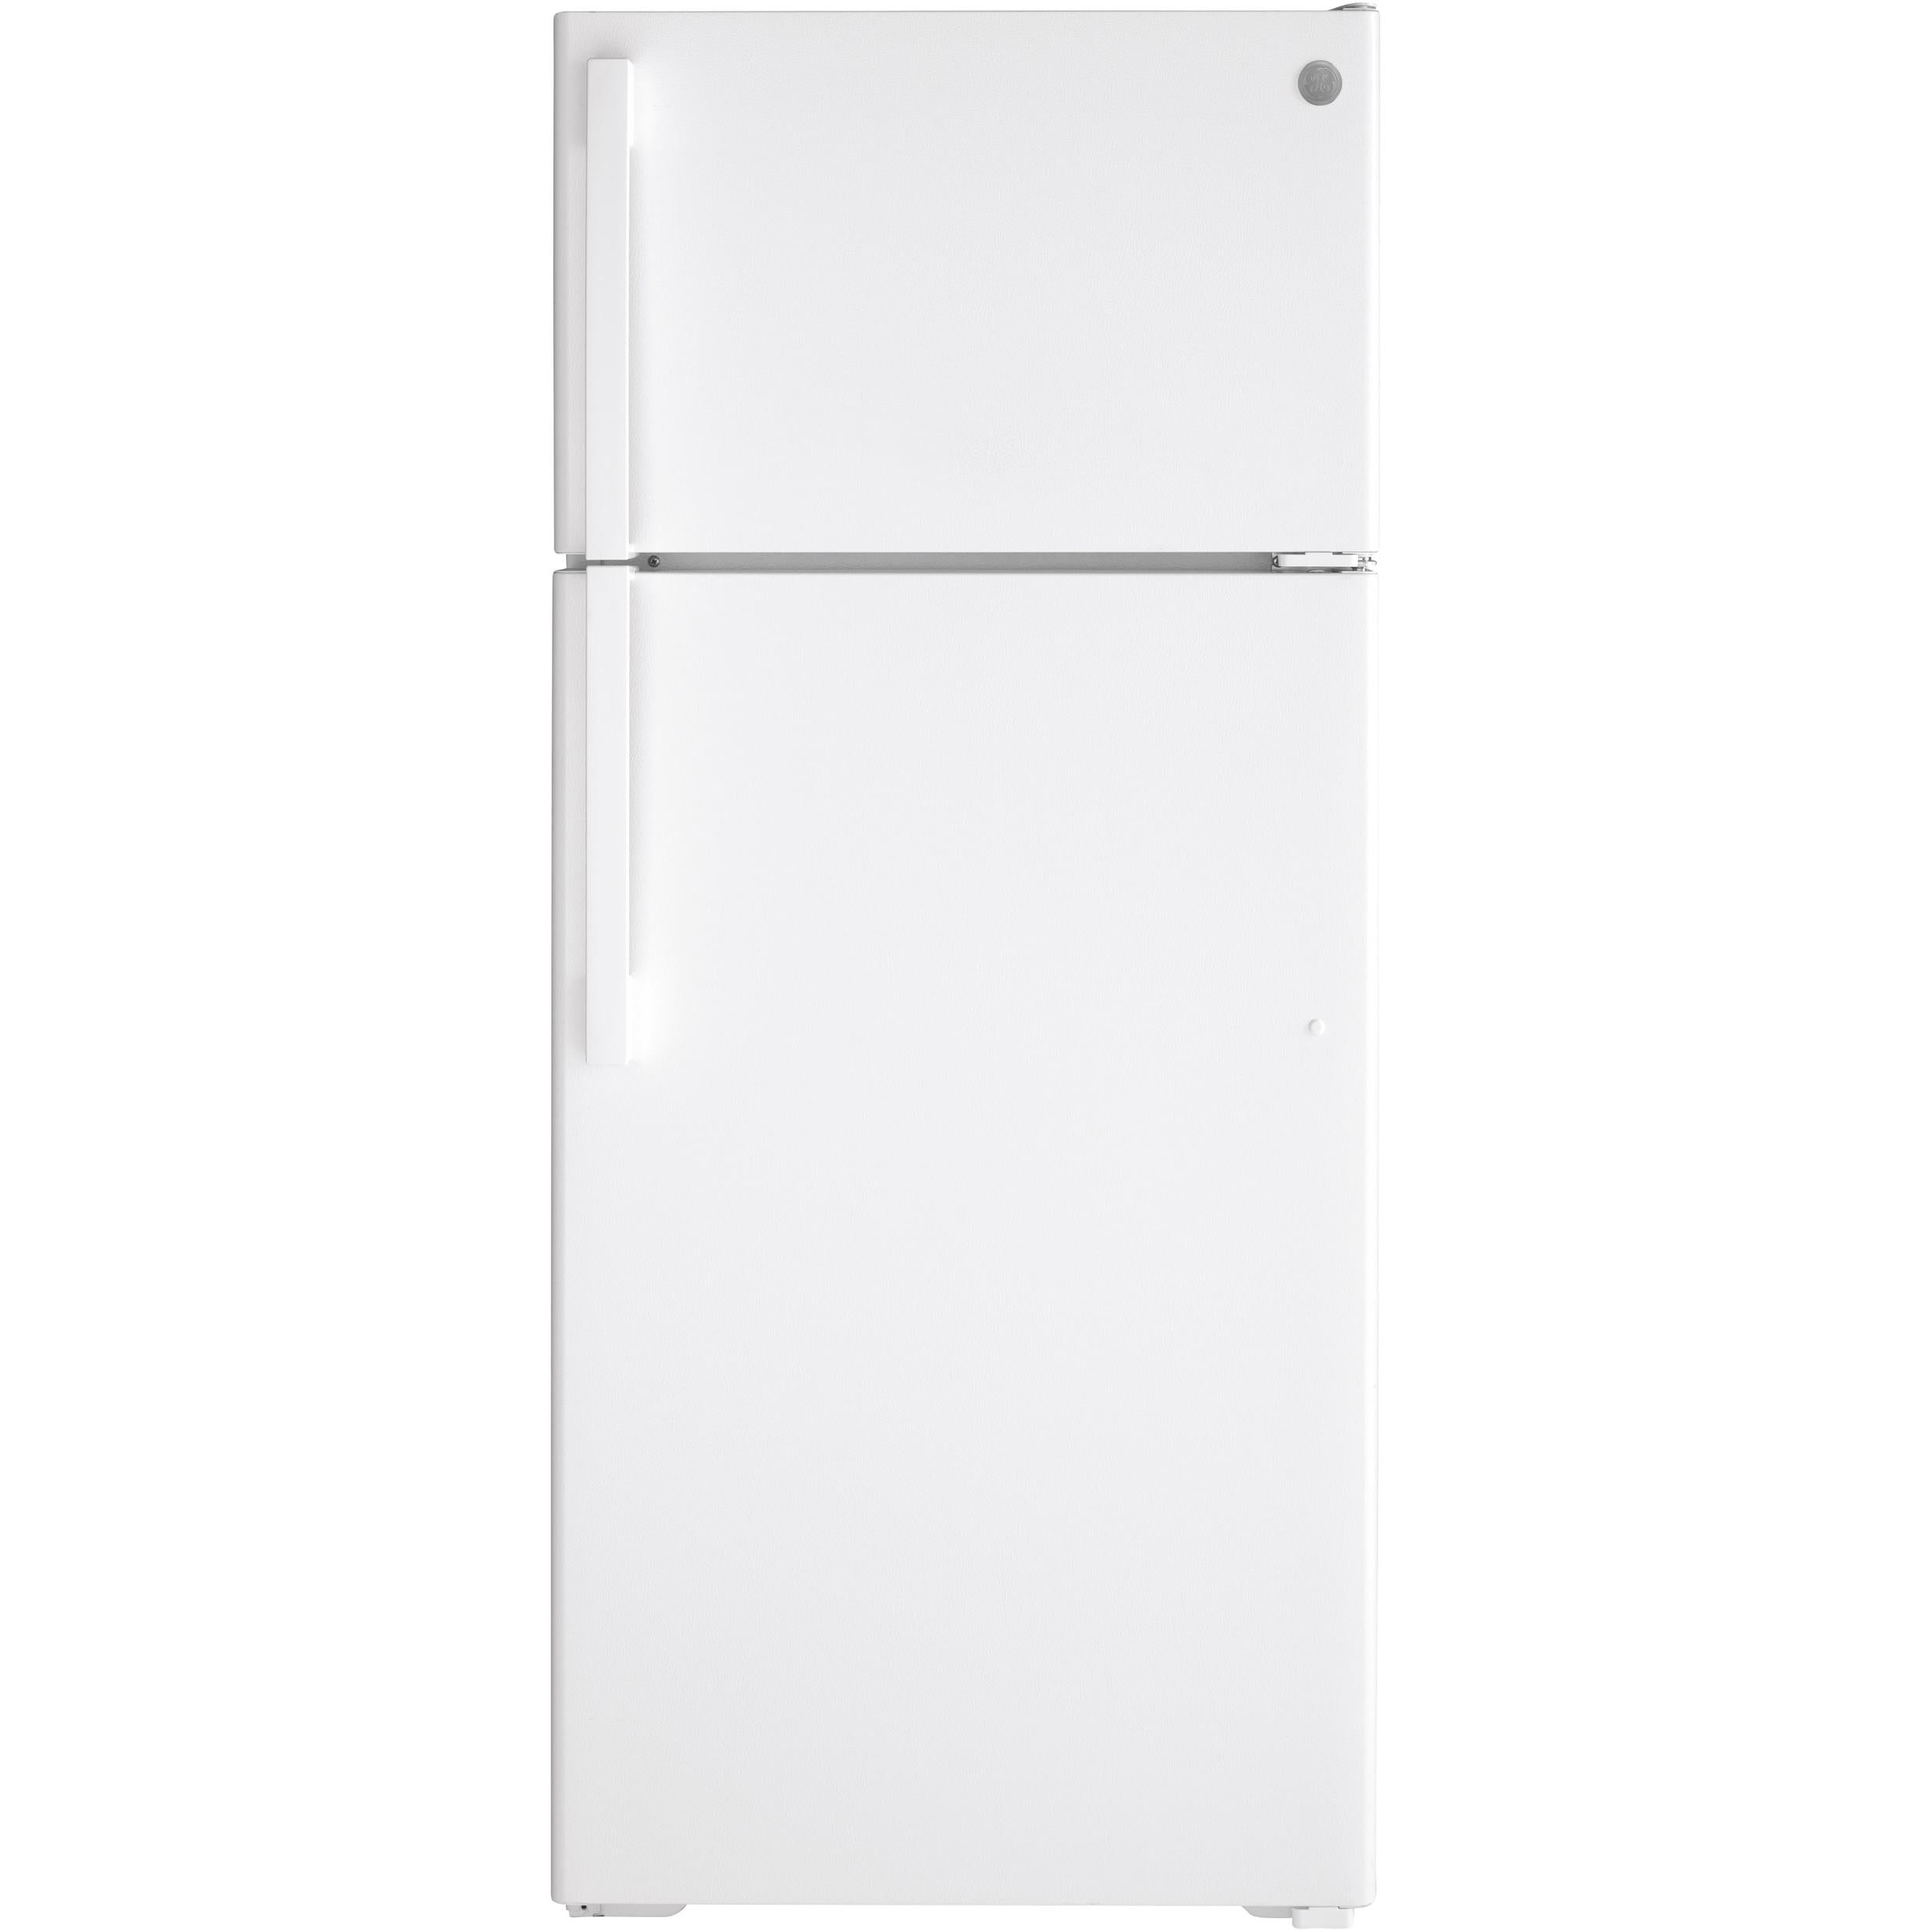 GE 17.5 cu. ft. Top Freezer Refrigerator with Factory-Installed Icemaker GIE18DTNRWW